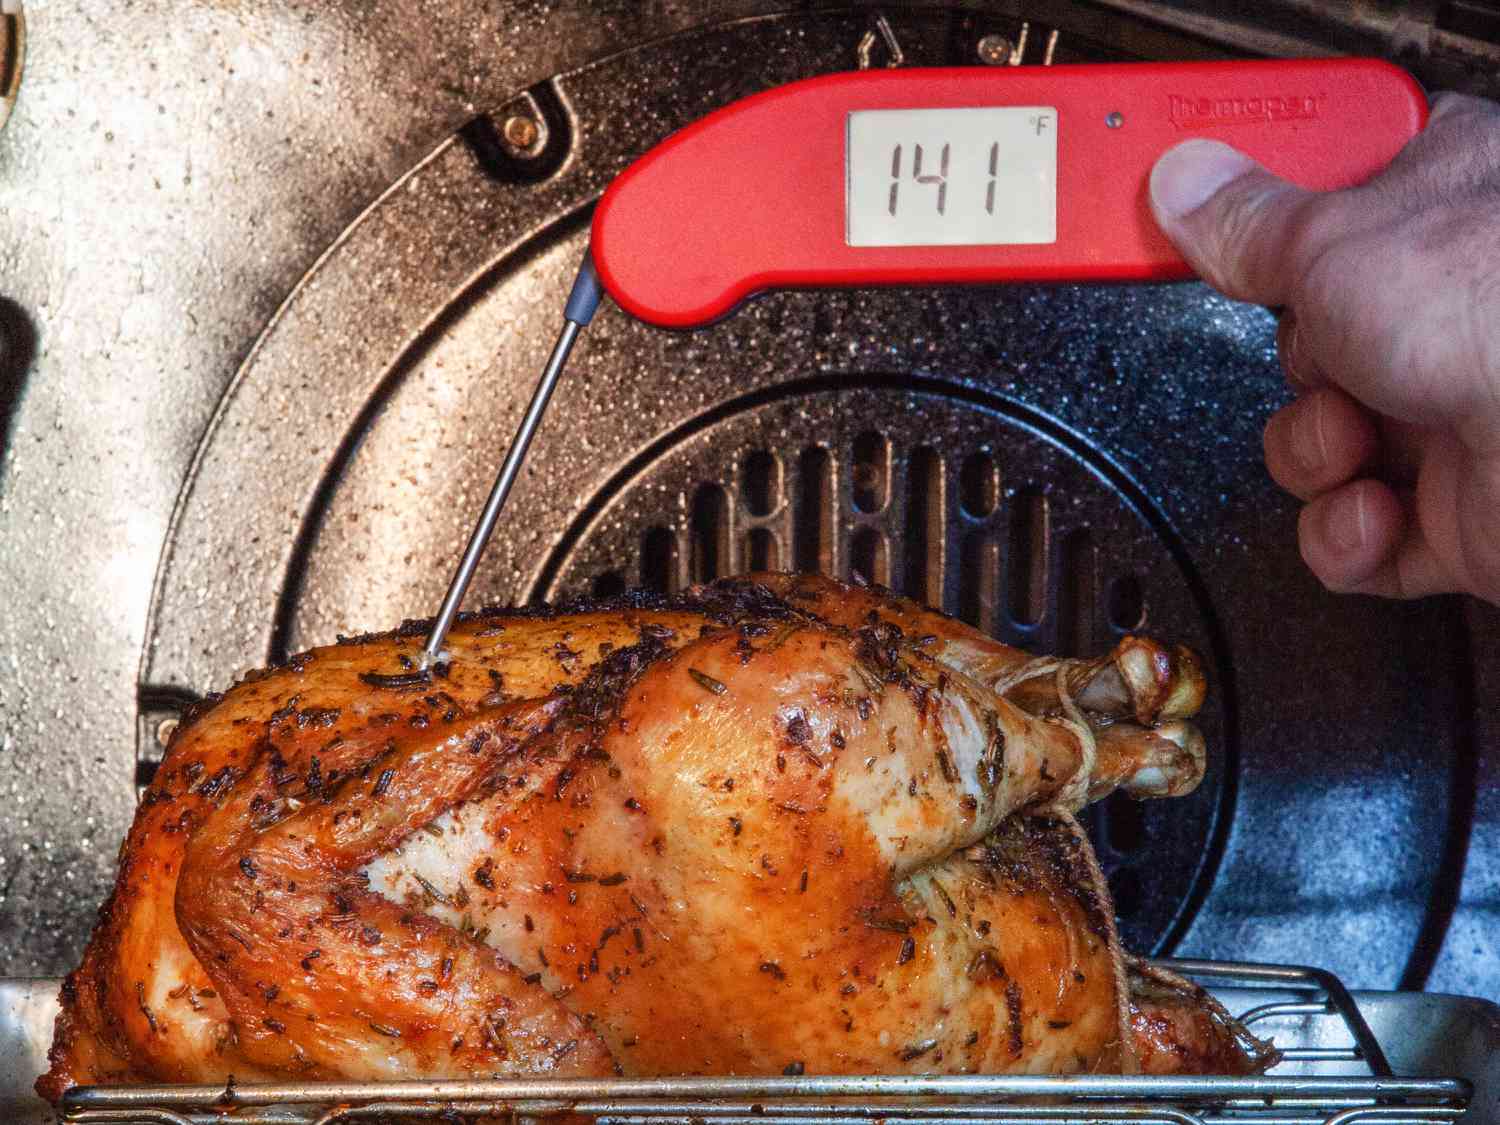 Using the Thermapen one to take the temp of roast chicken